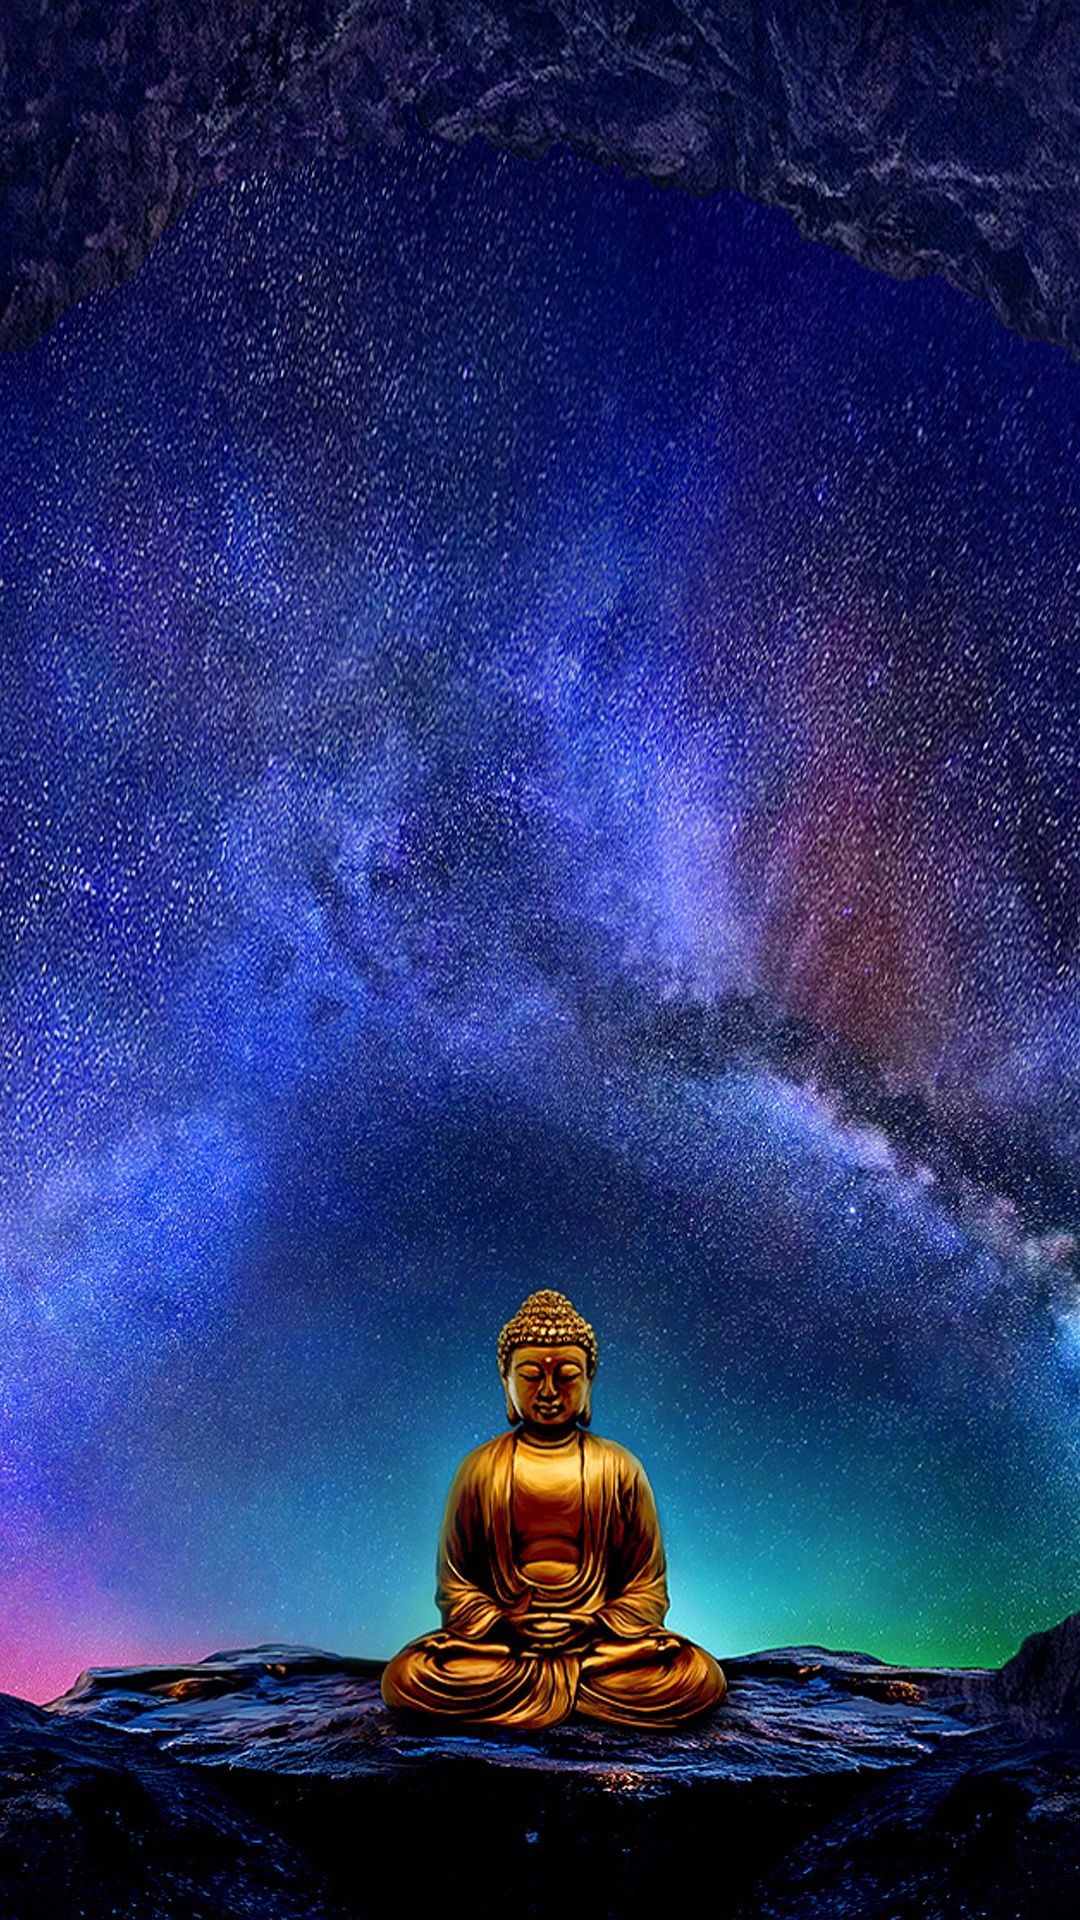 1080x19 Buddha Wallpaper For Mobile Devices Artwork Buddha Wallpaper Hd 1080x19 Wallpaper Teahub Io